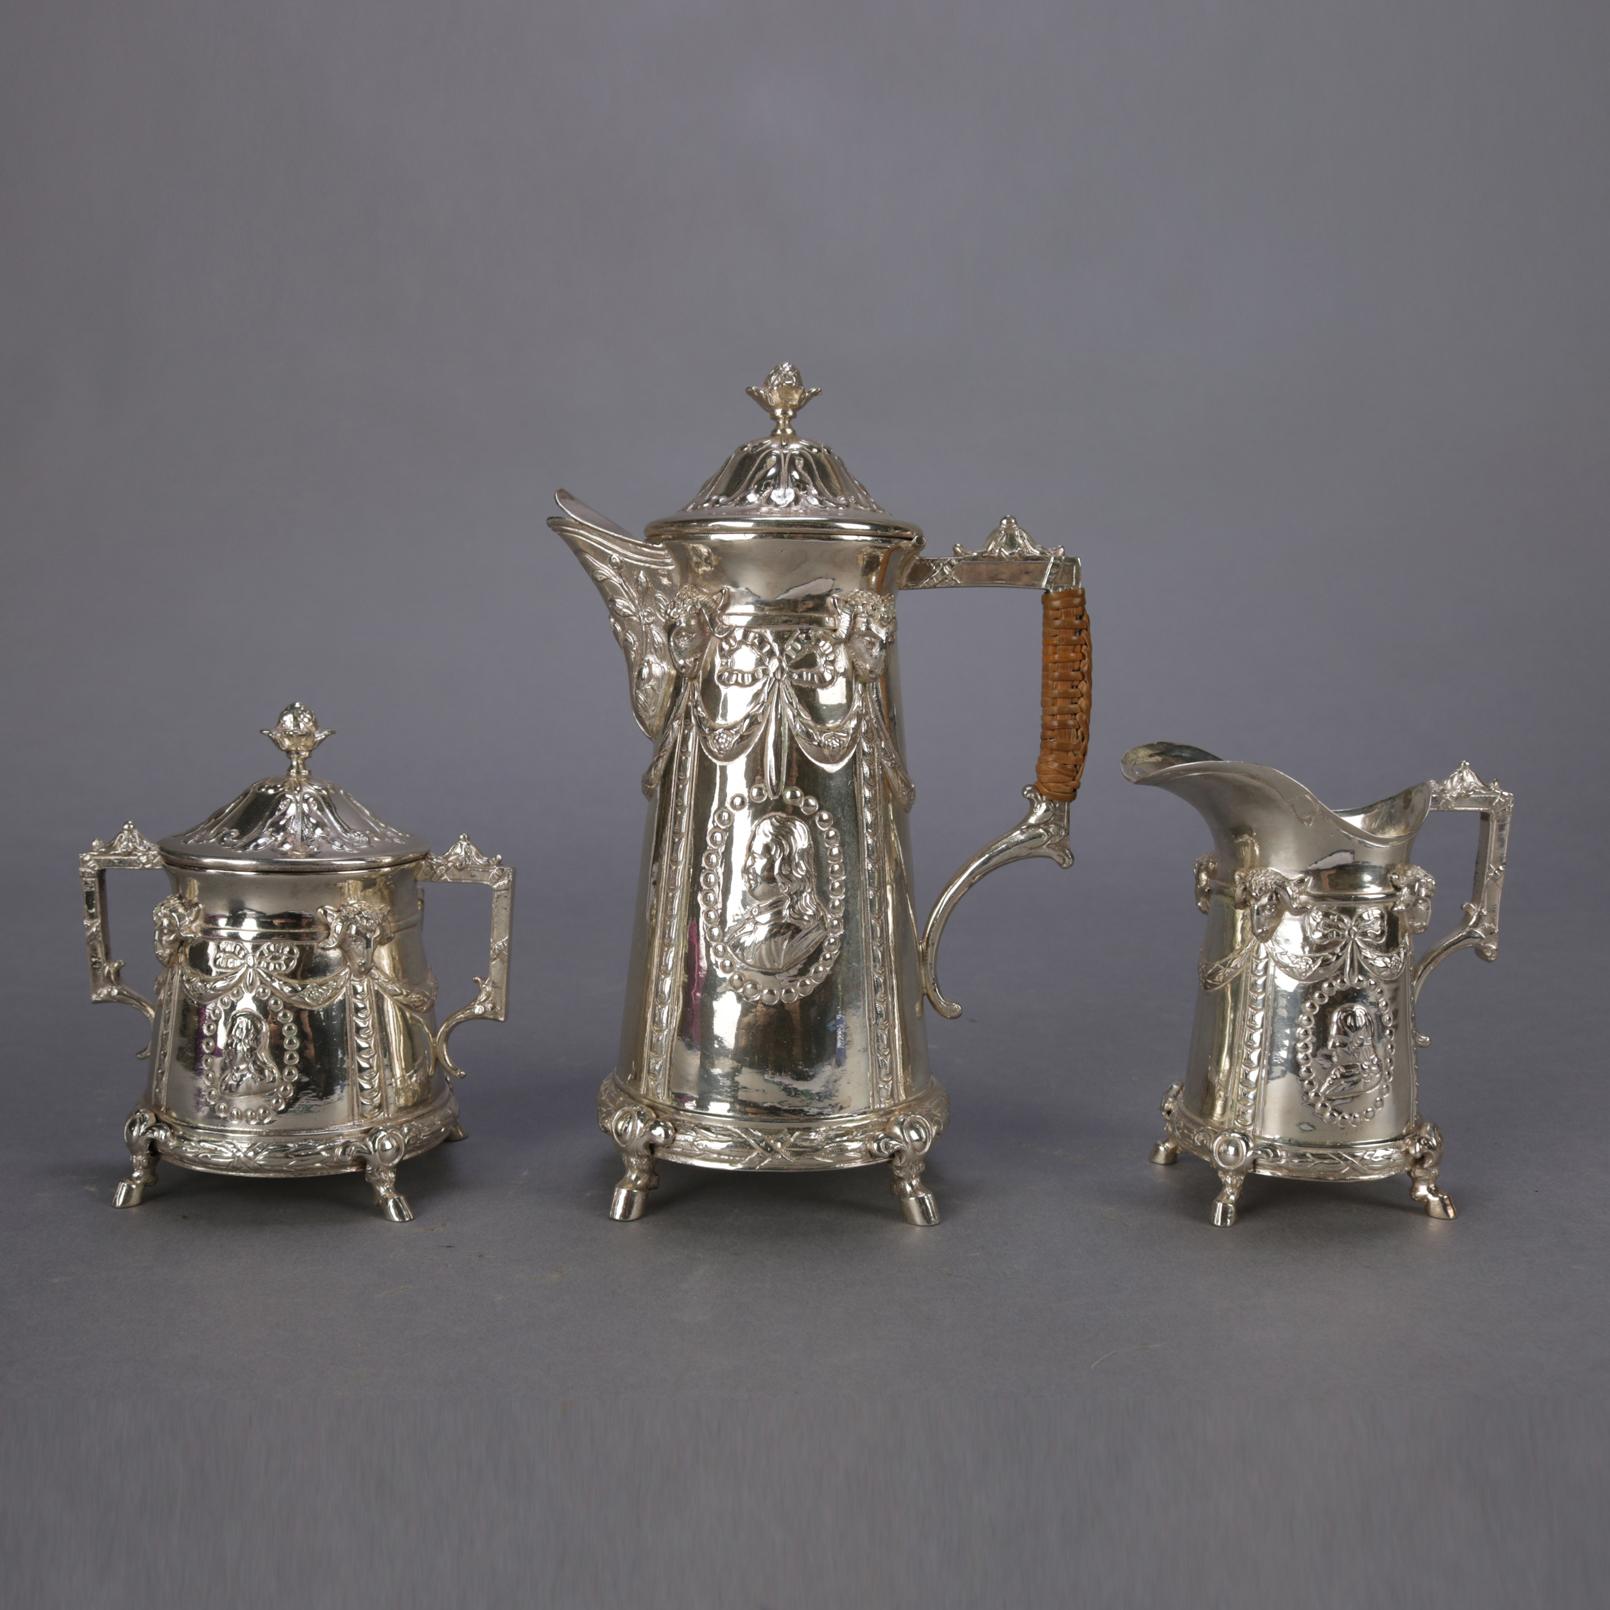 Three piece German .800 silver petite tea set by Georg Roth Hanau features repousse rams heads, garland drape with bows, and bead framed reserves with cameos; each raised on hoof feet; includes tea pot, covered sugar and creamer, hallmarks on base